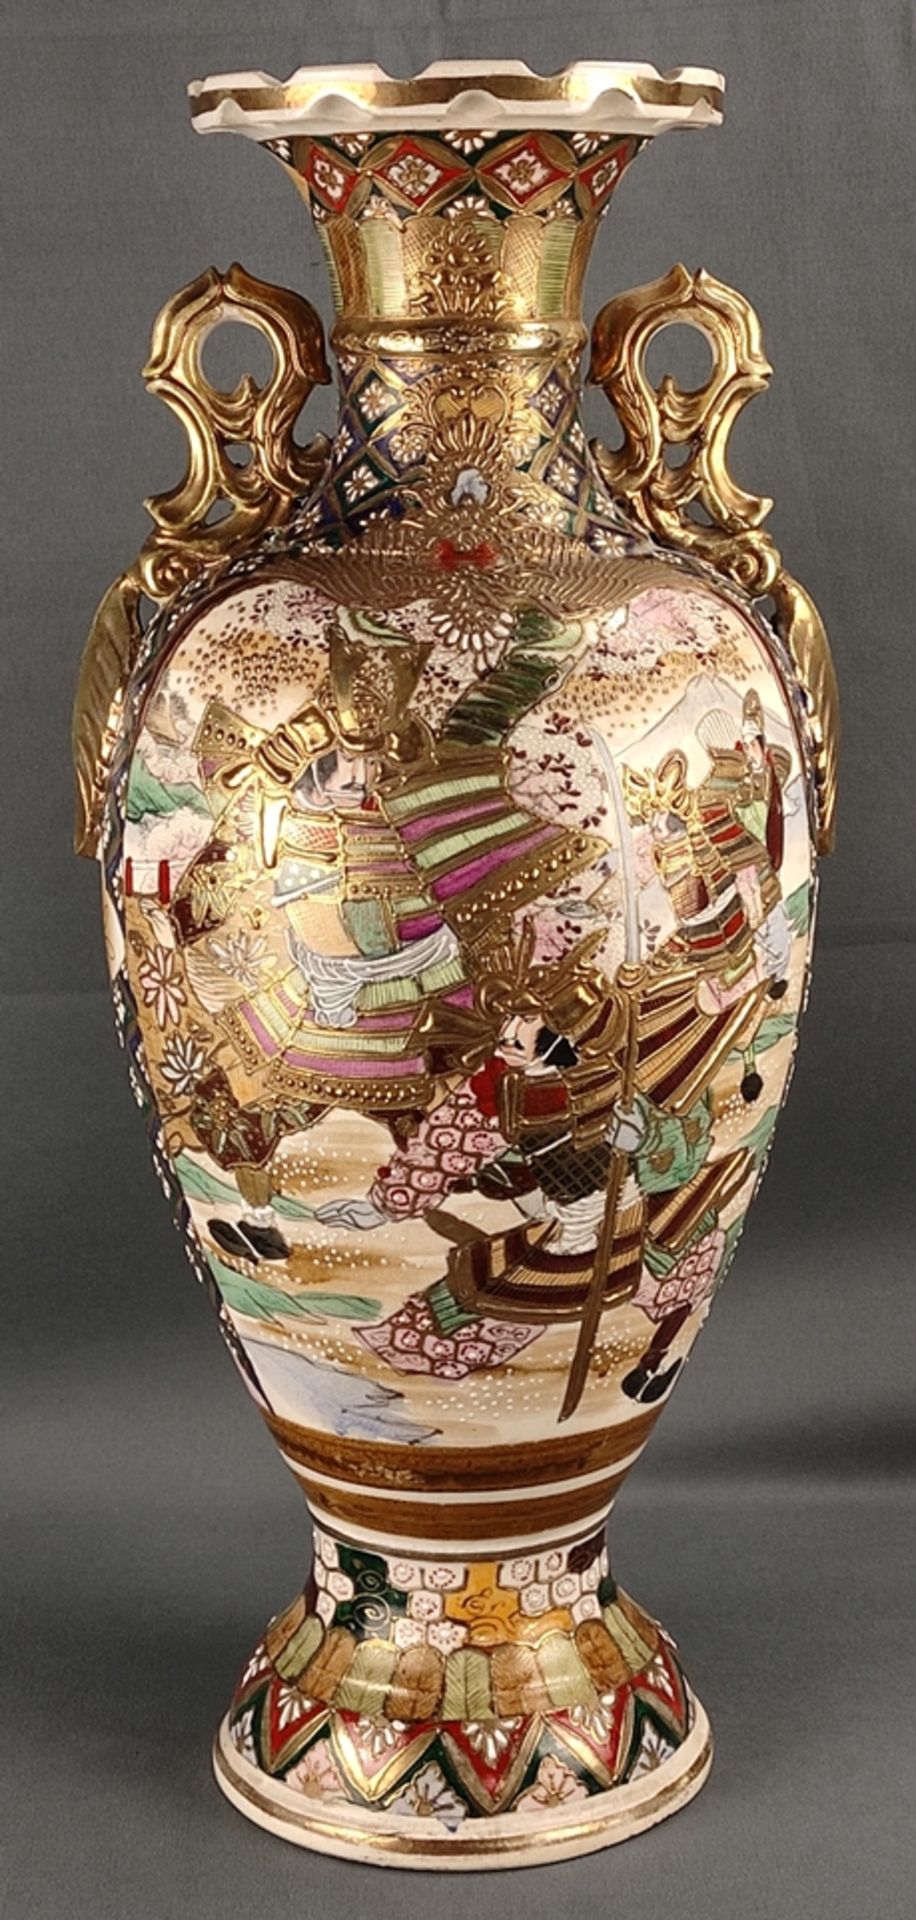 Large baluster vase with two side handles, Japan, c. 1910, polychrome painted, one side scene with 